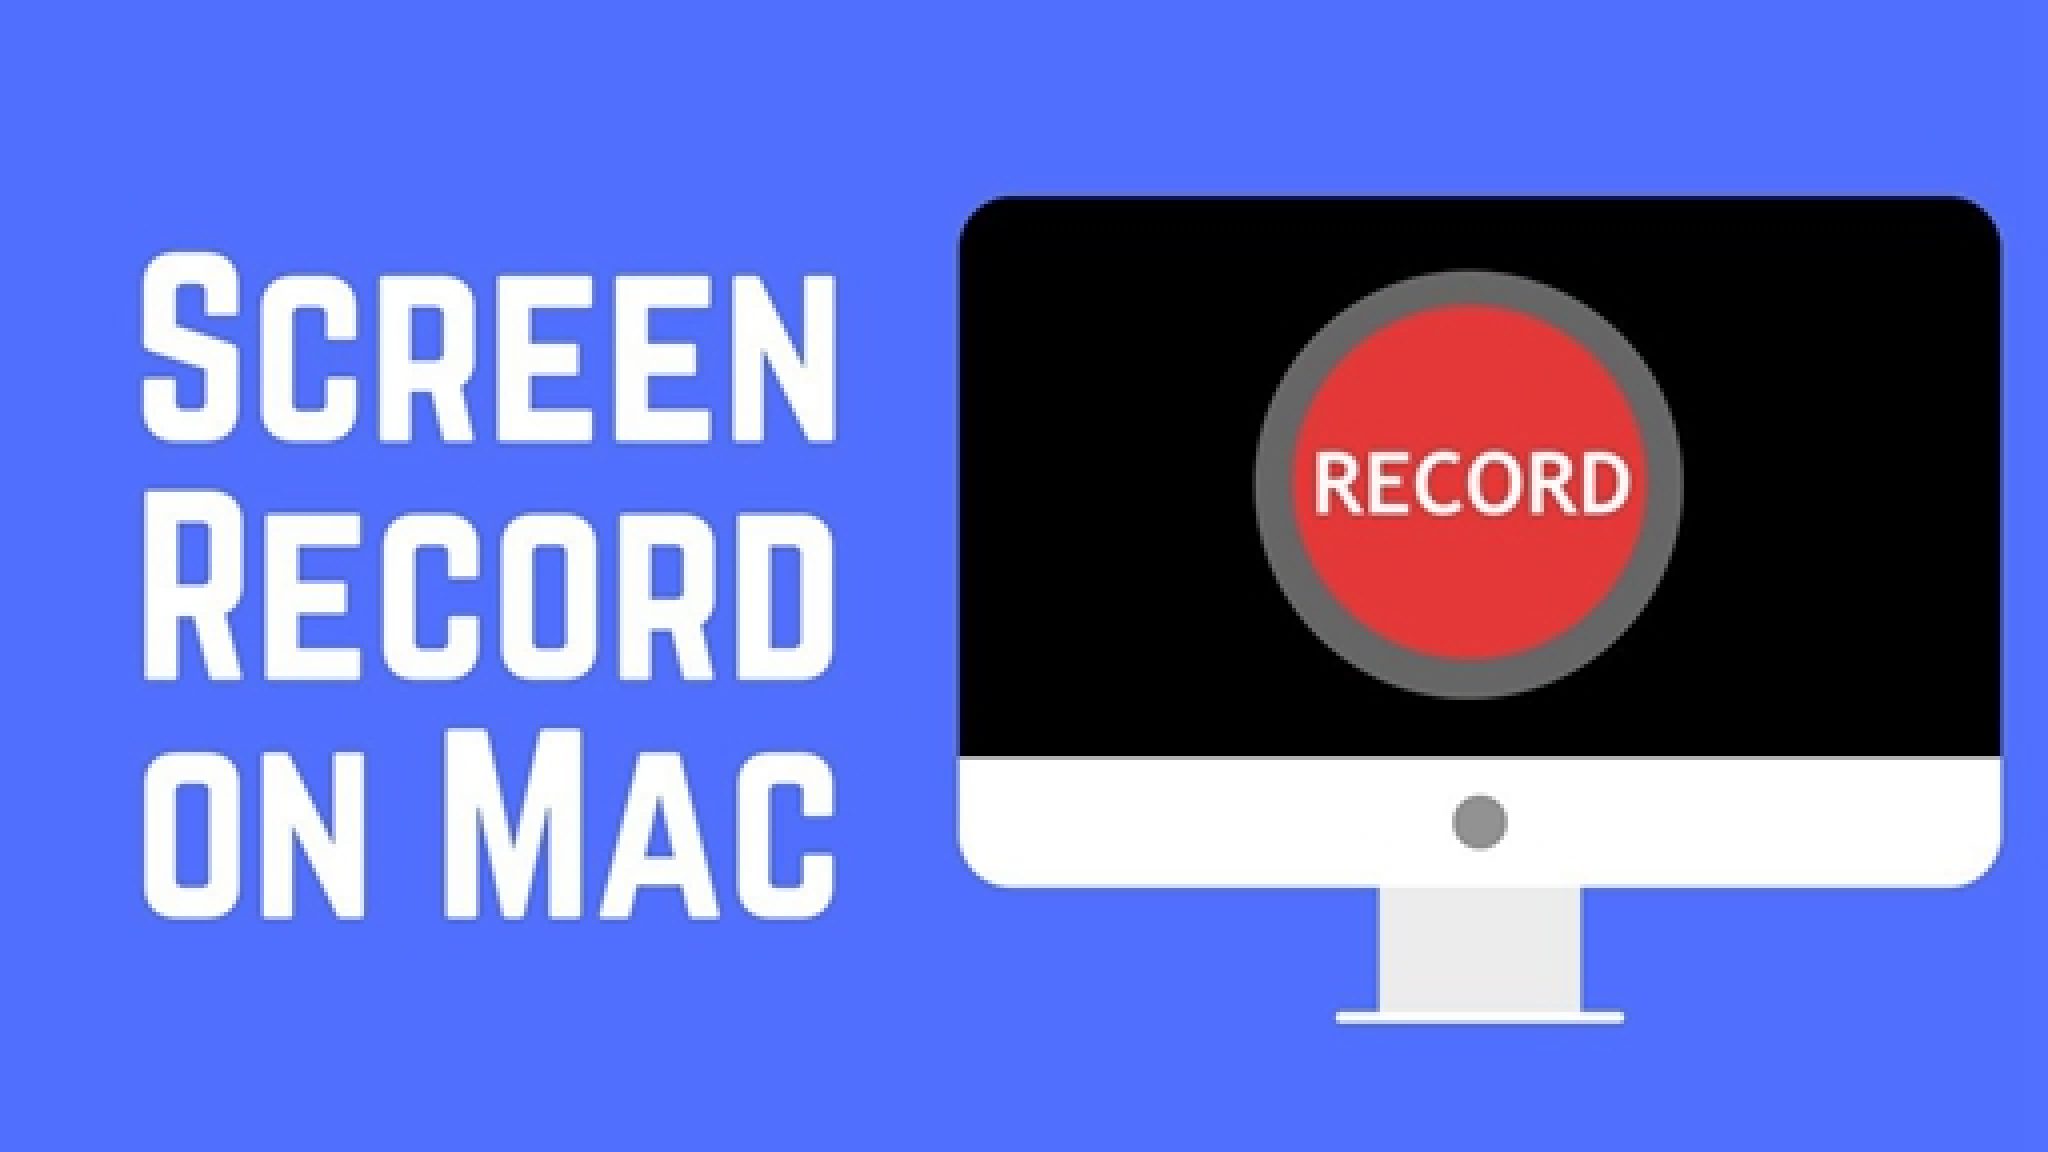 screen recorder for mac free